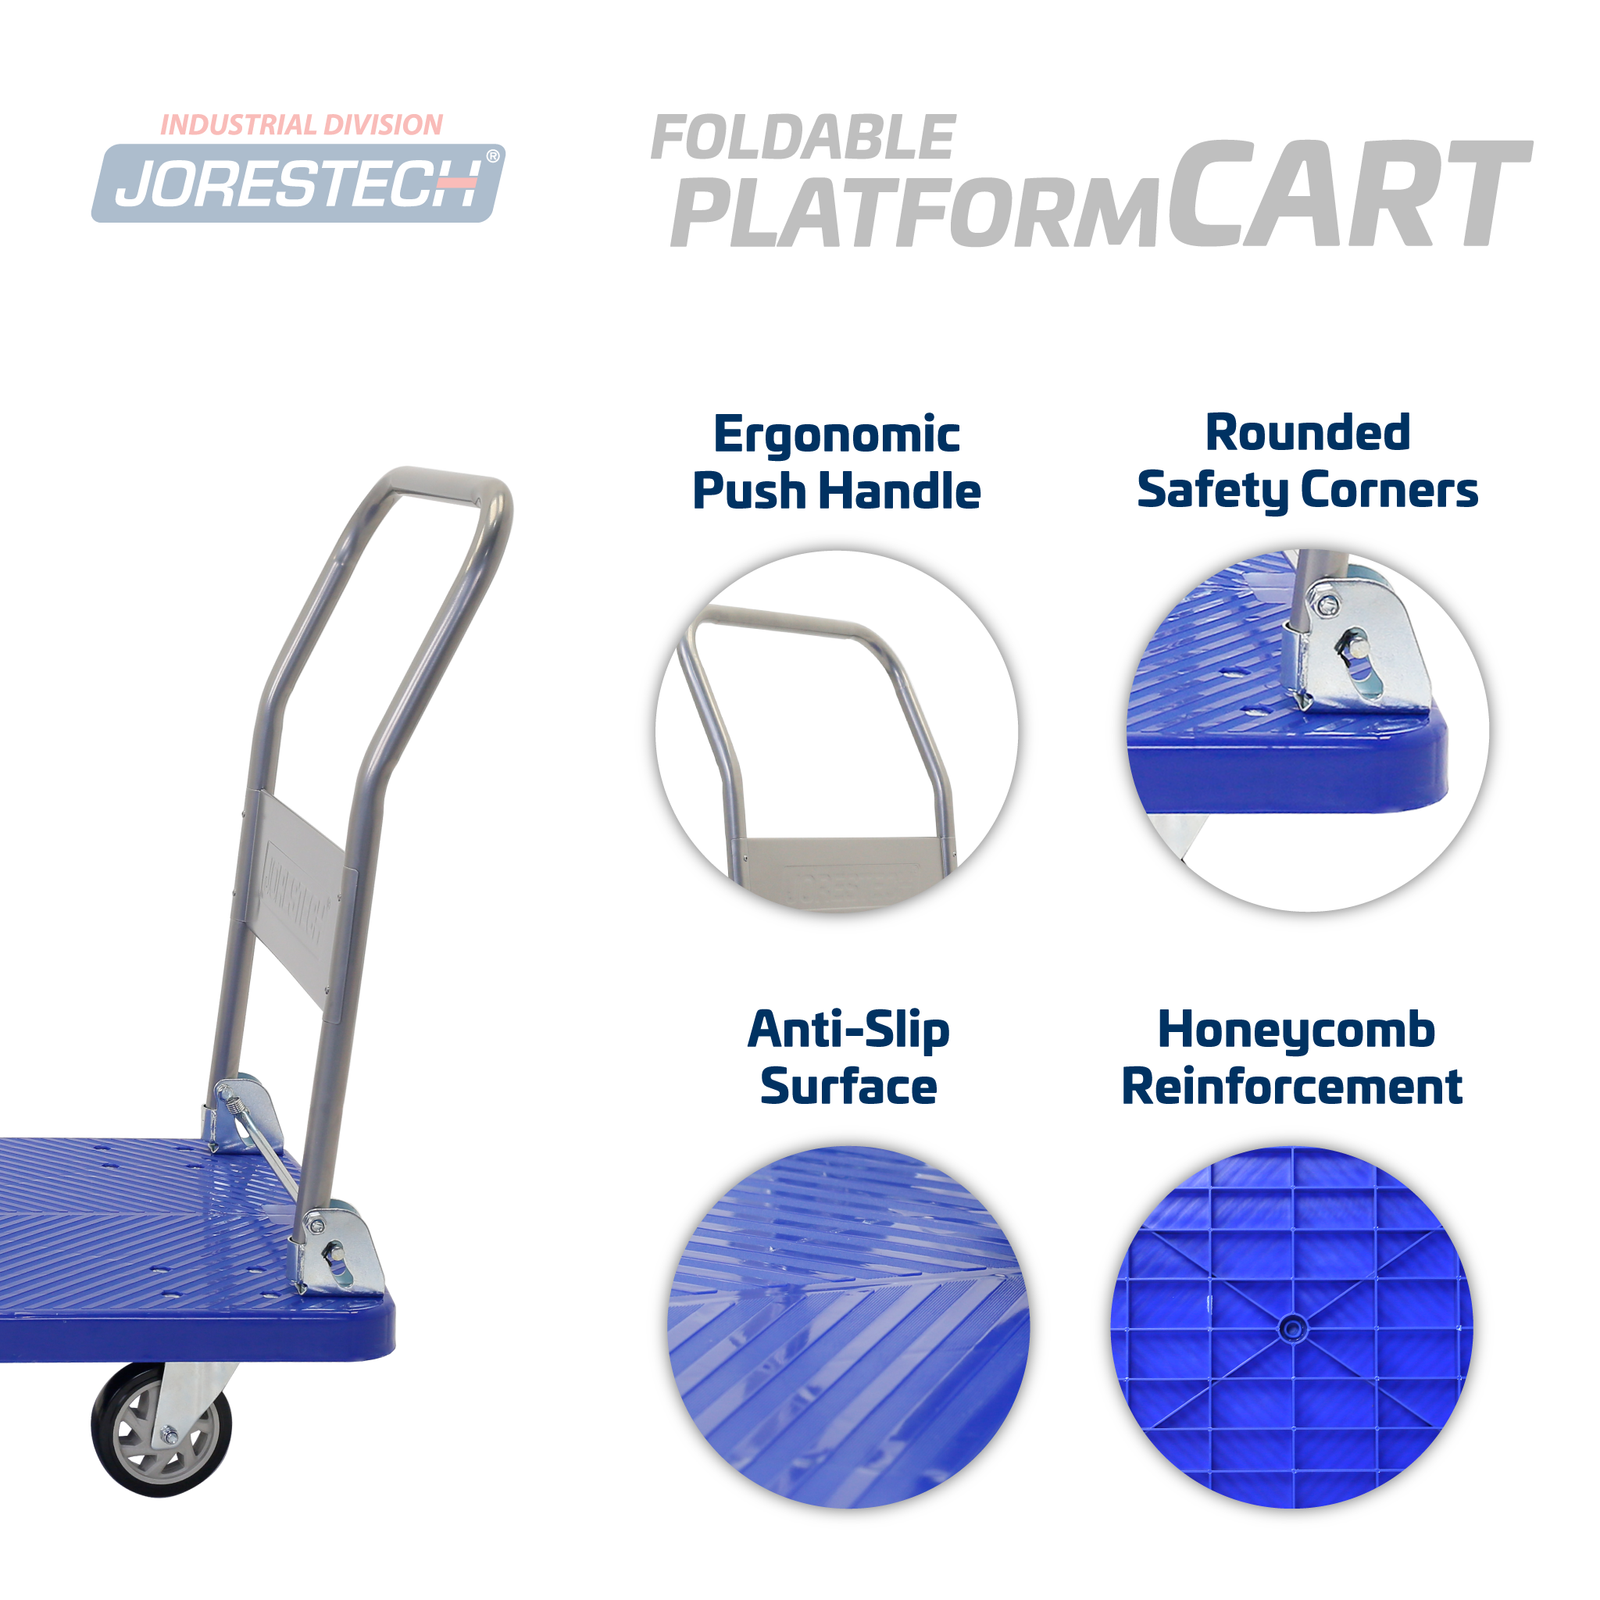 Features of the JORES TECHNOLOGIES® foldable platform dolly cart. The features read: ergonomic push handle, rounded safety corners, anti-slip surface, honeycomb reinforcement